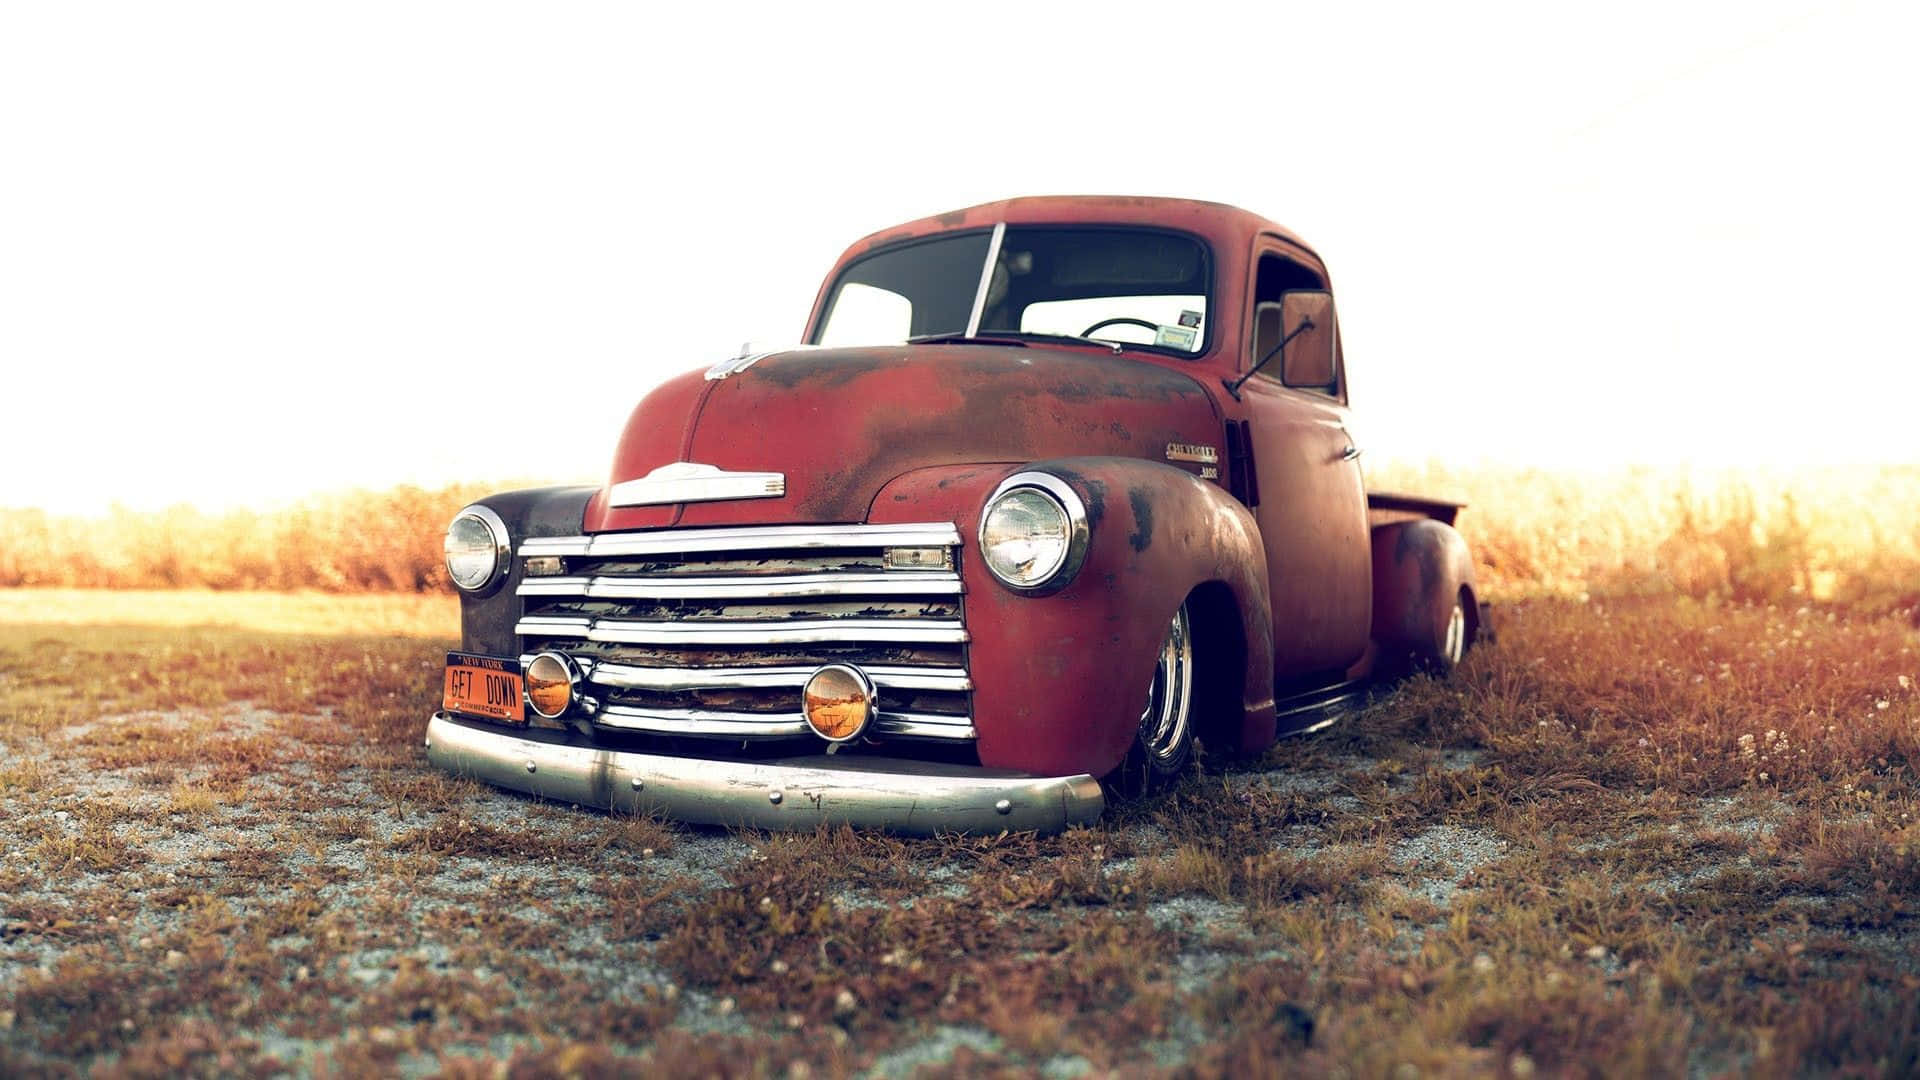 An Old Red Truck Is Parked In A Field